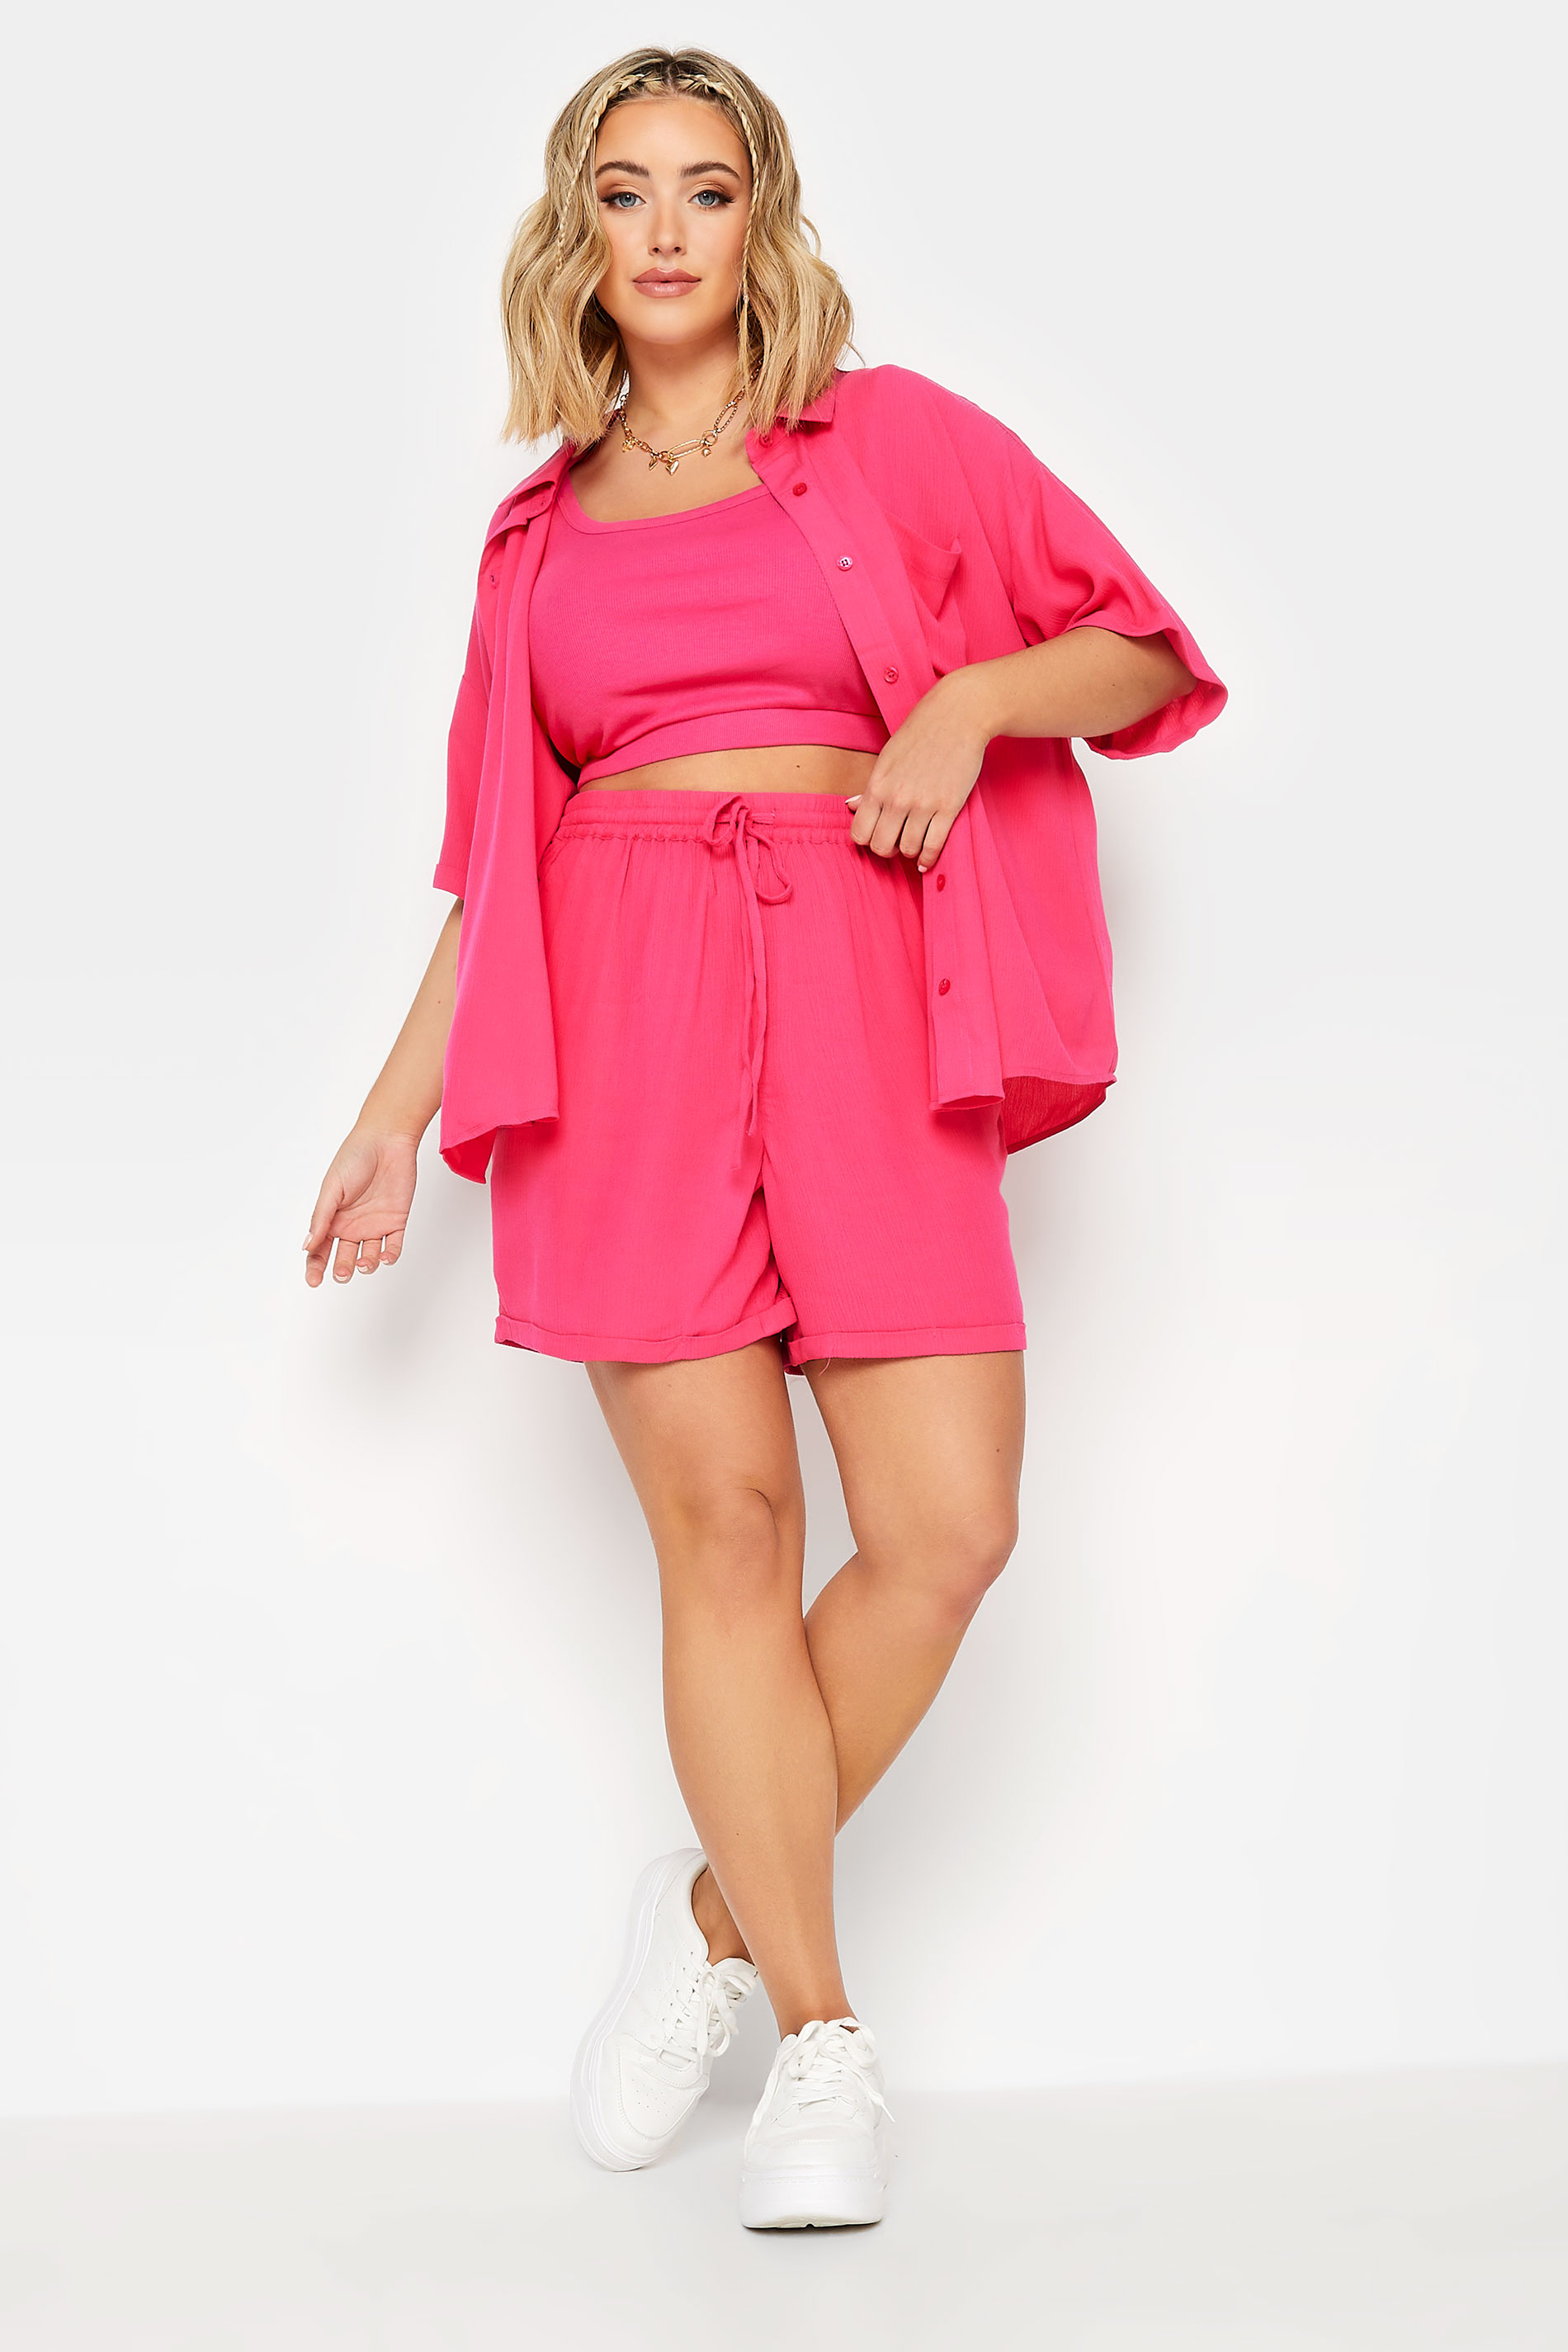 LIMITED COLLECTION Plus Size Curve Hot Pink Crinkle Shorts | Yours Clothing  1